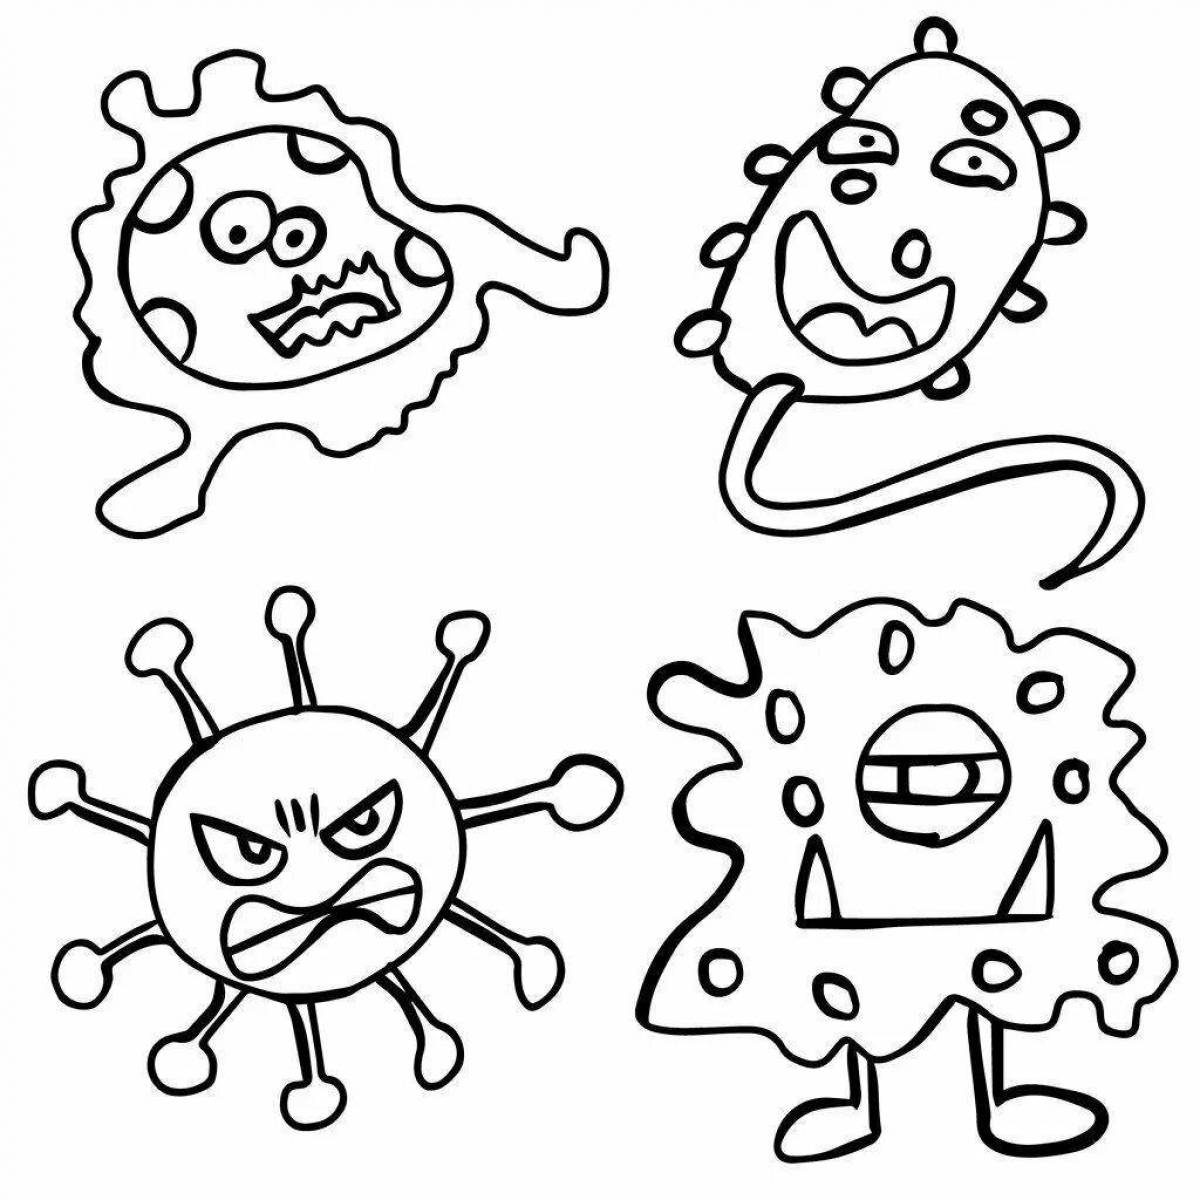 Playful bacteria coloring page